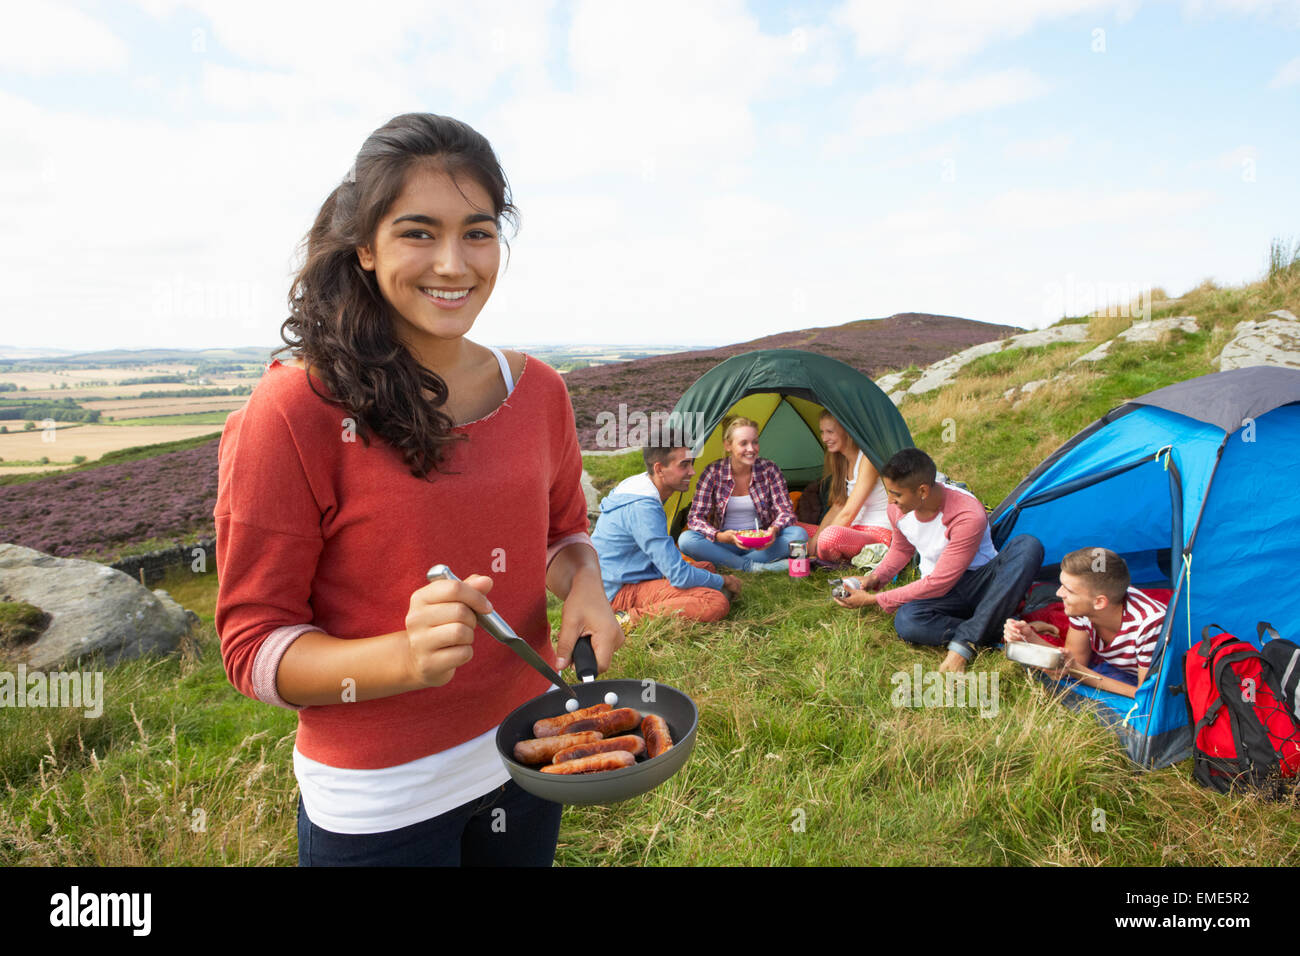 Group Of Young People On Camping Trip In Countryside Stock Photo